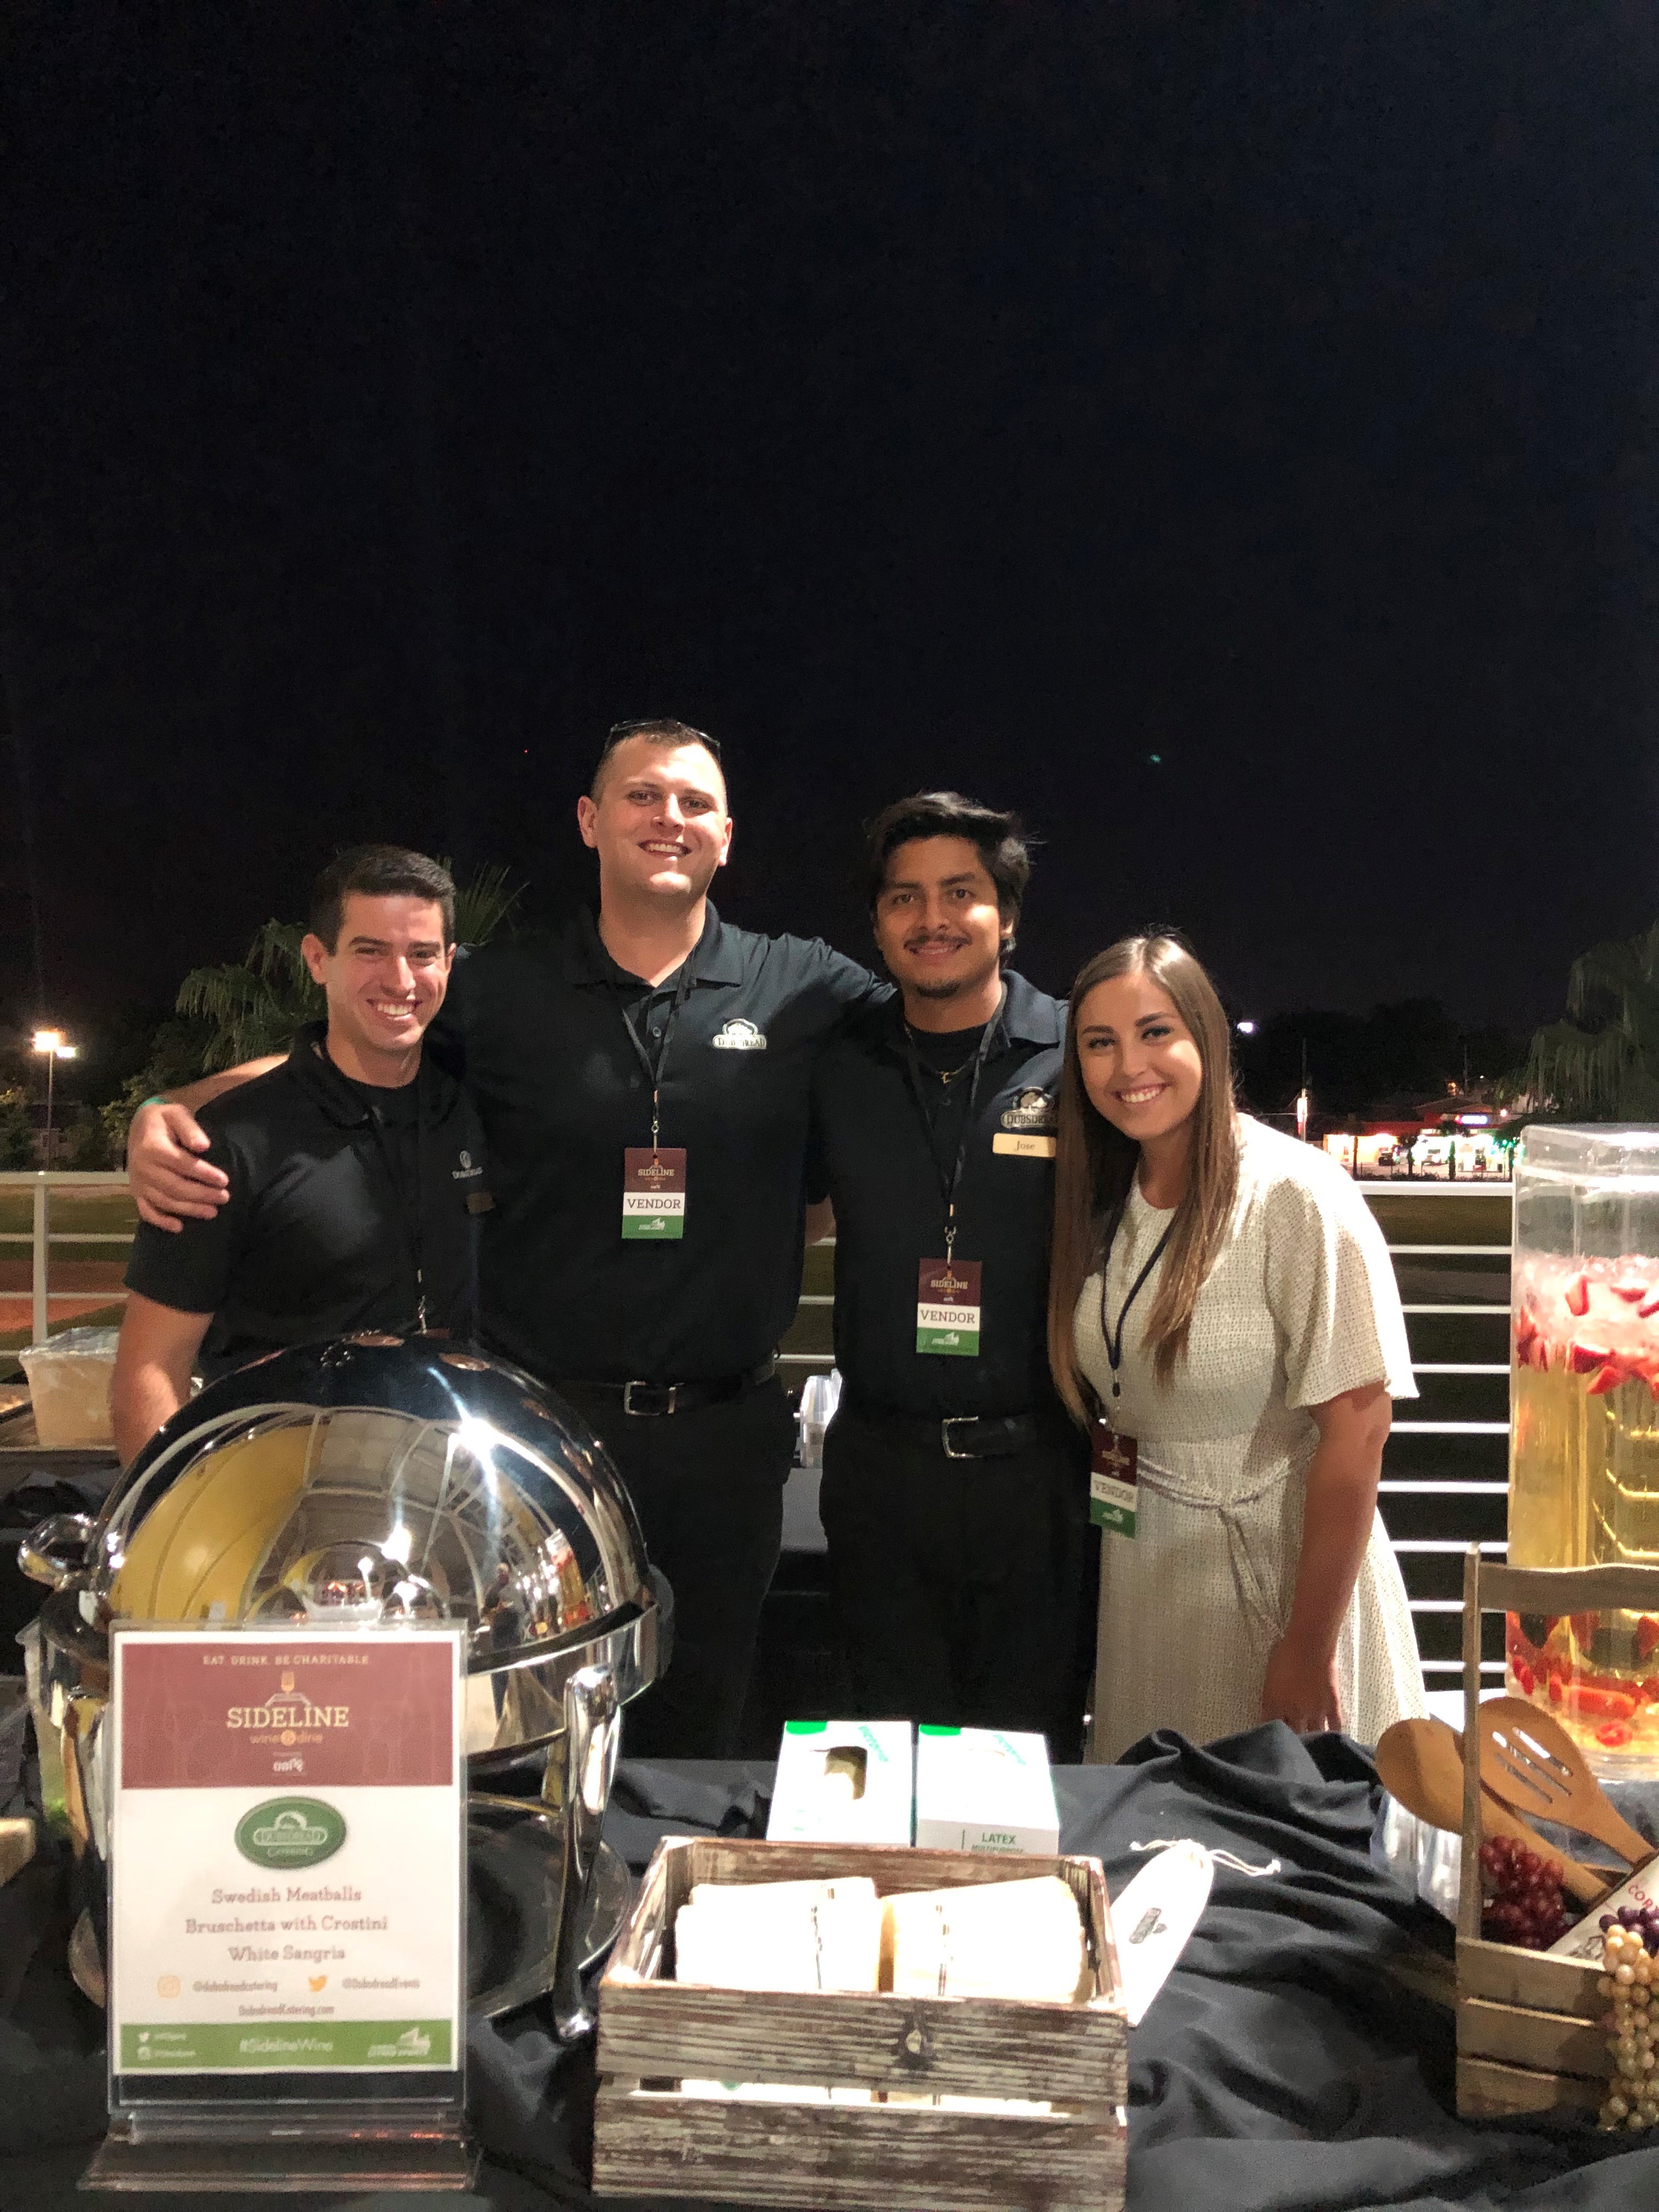 dubsdread catering crew posing at sideline wine and dine